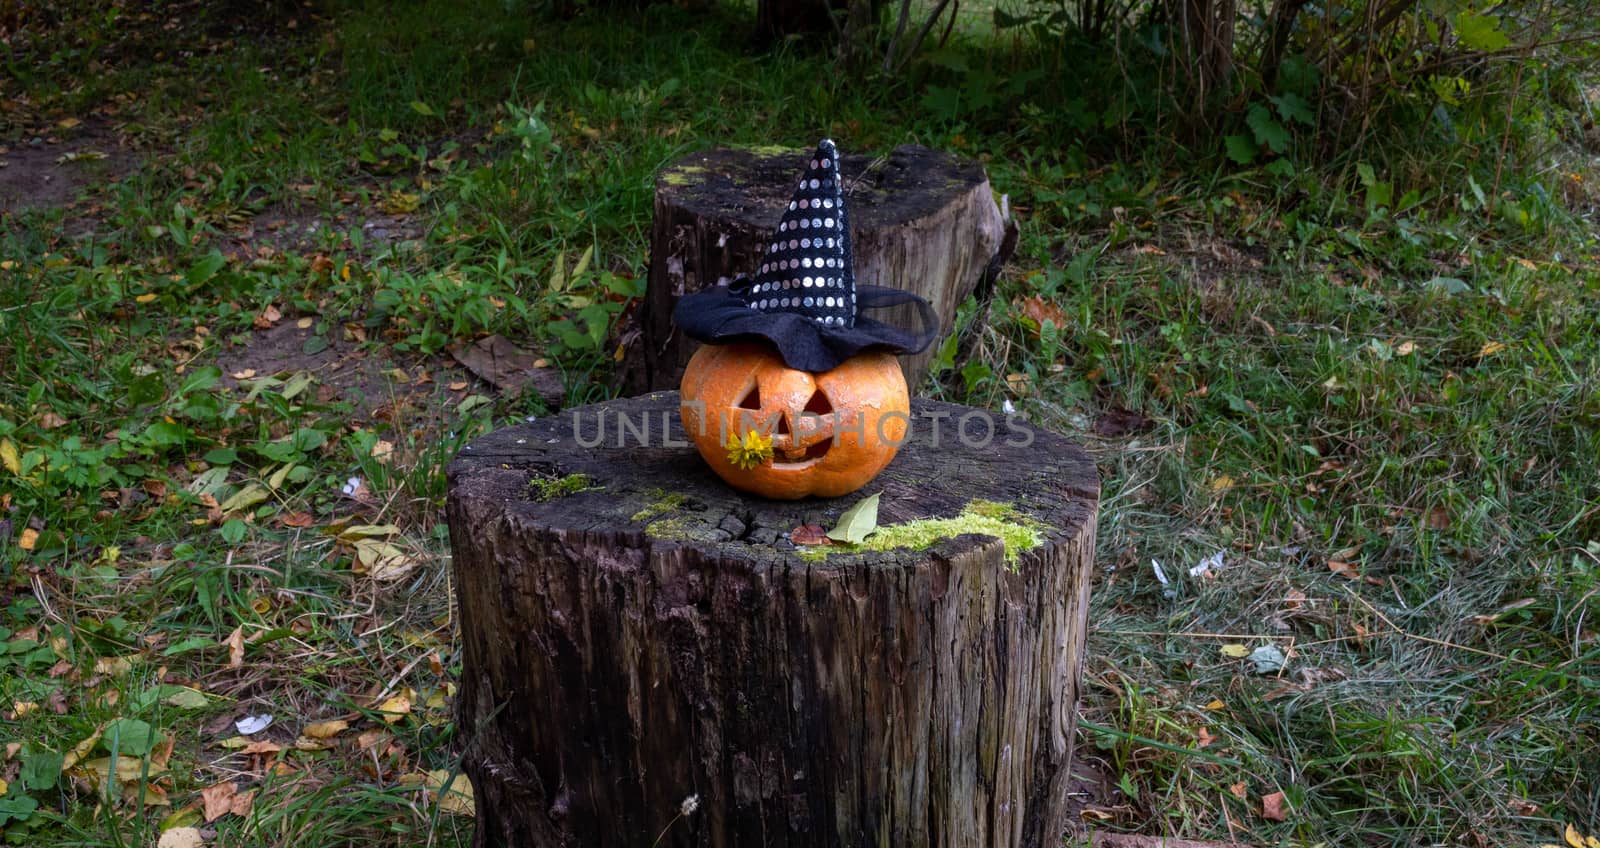 A Jolly pumpkin in a Witch's hat is sitting on an old tree stump.The Concept Of Halloween.